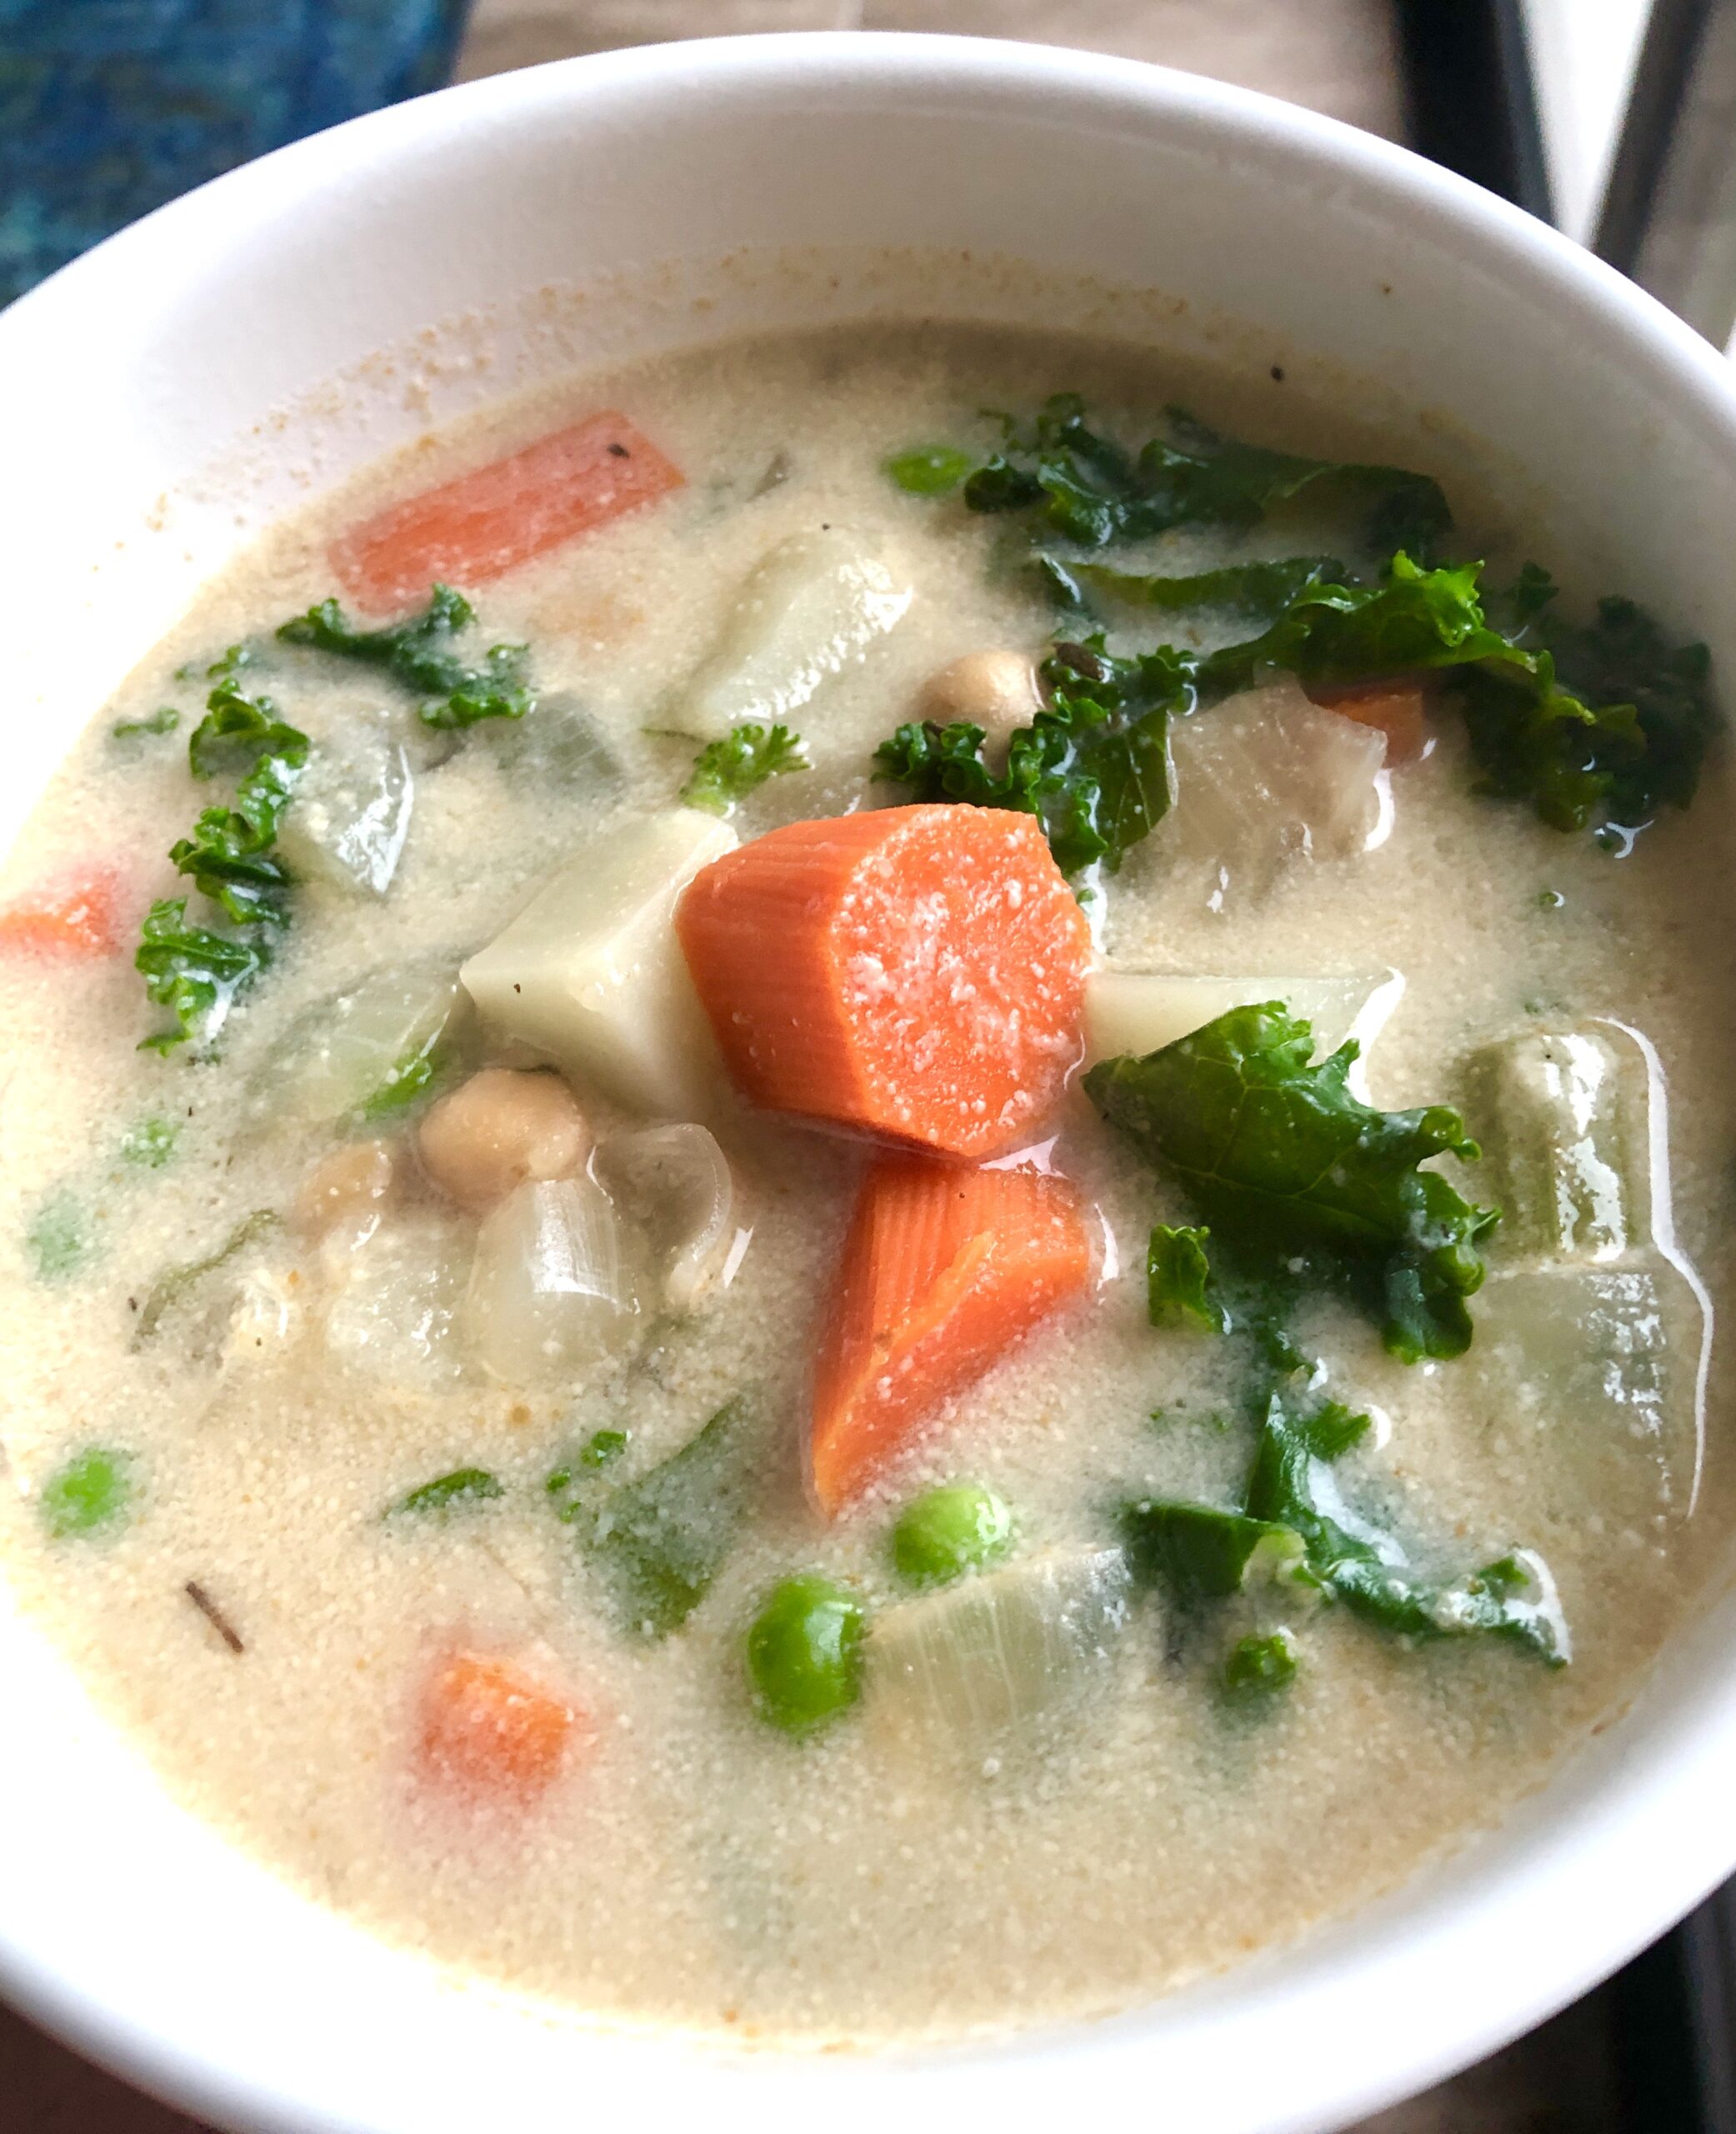 White bowl with a creamy vegetable soup. The broth is white with big chunks of carrots, potatoes, kale, and peas